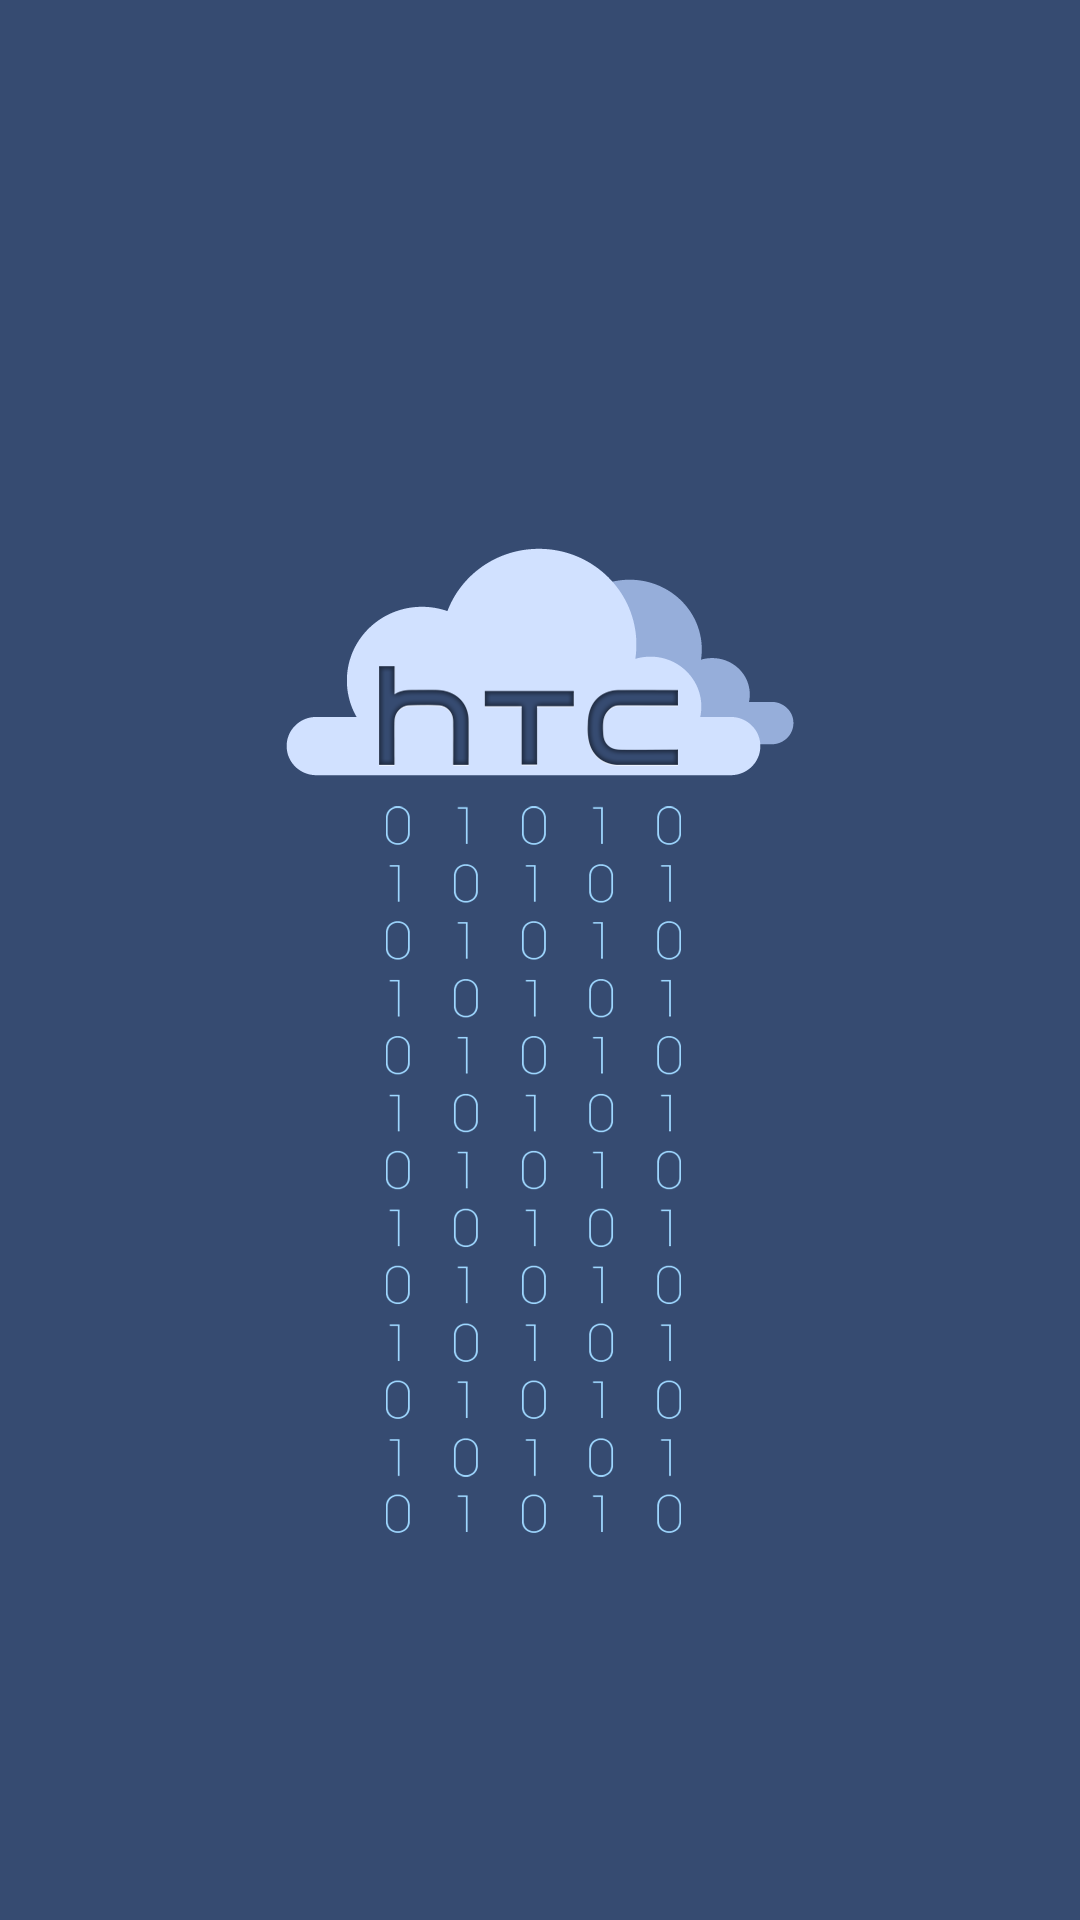 Ments To Htc Wallpaper Image In HD For Mobile